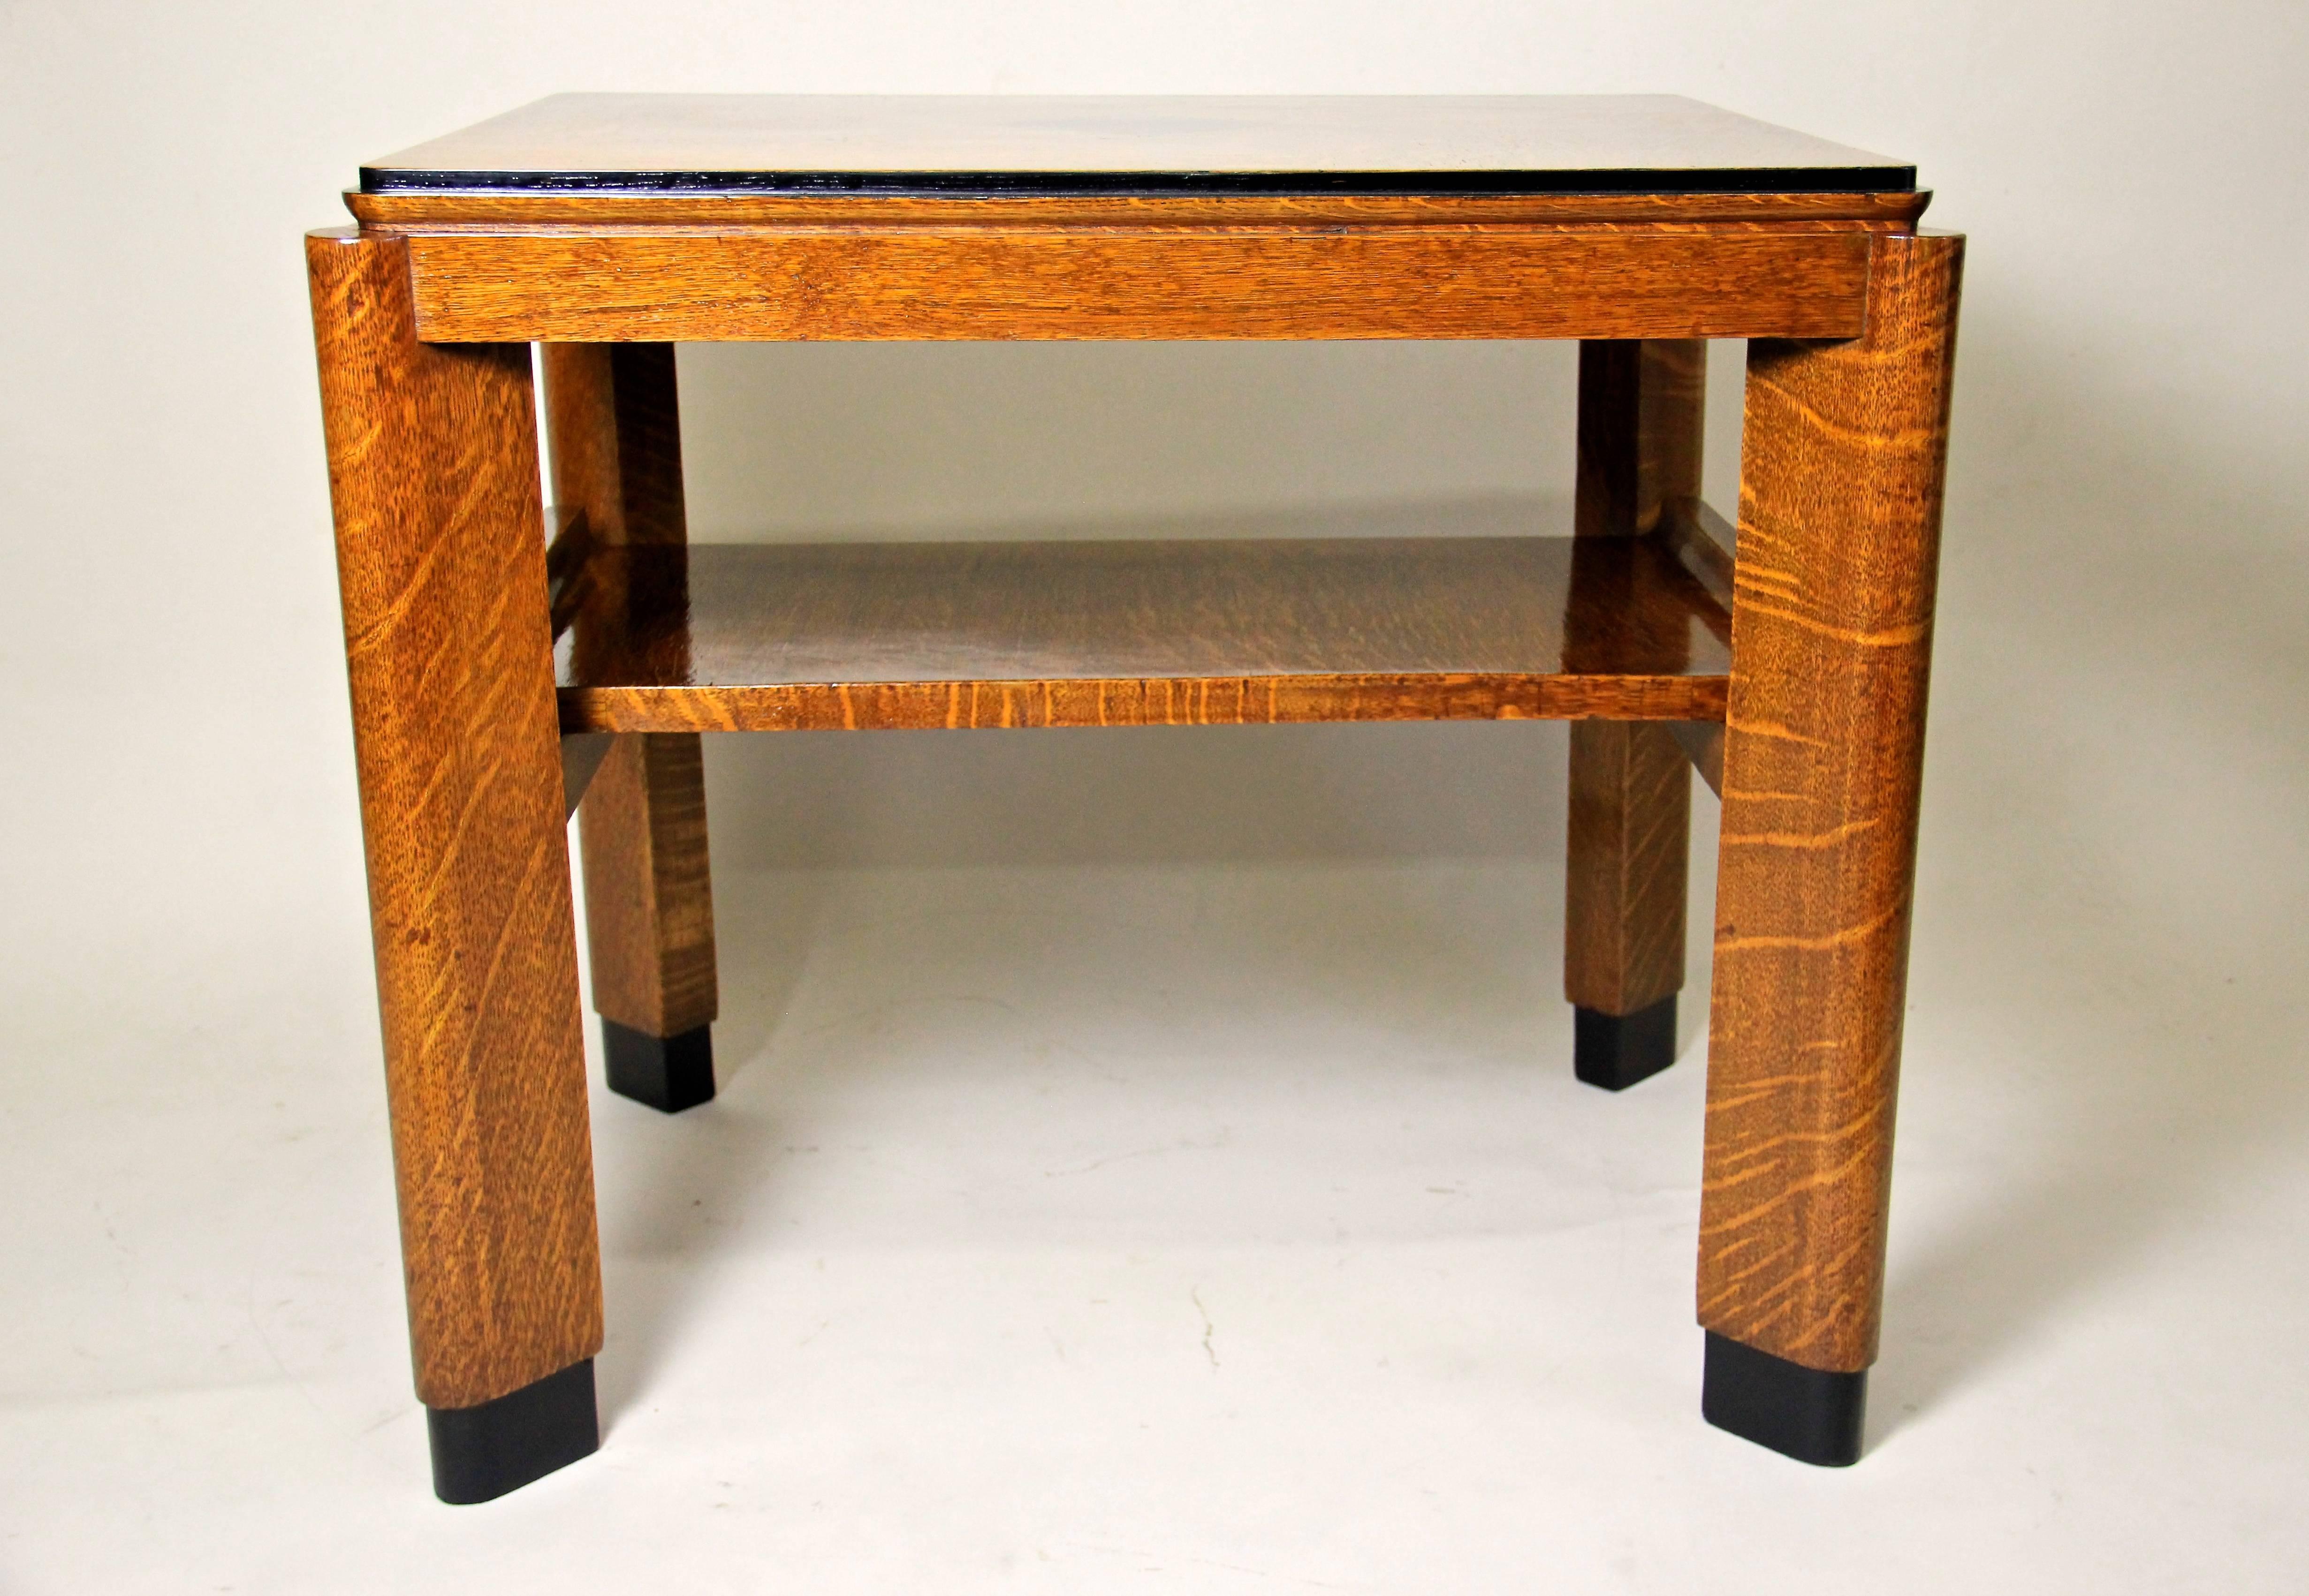 This outstanding Austrian Art Deco table was made of fine oakwood veneer in Austria around 1925. The absolute amazing design of this beautiful piece is worthy of note, just watch the nice tray underneath the tabletop!
The wonderful oak veneer